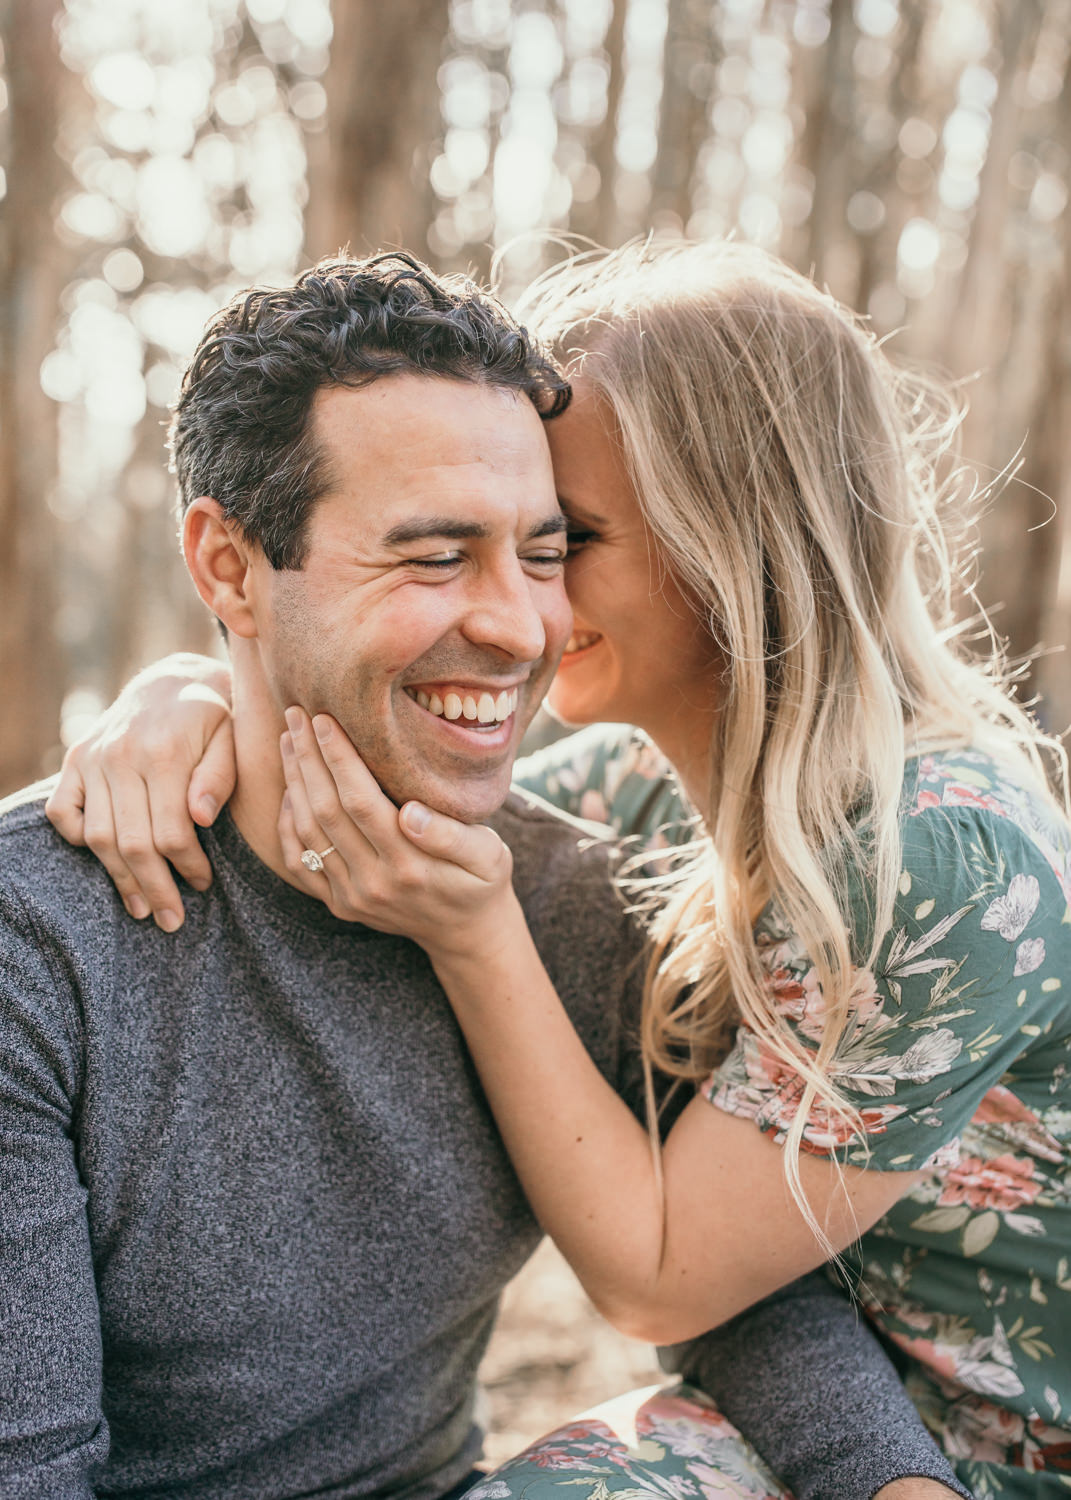 San Francisco Lovers Lane Presidio Forest Engagement Session couples posing inspo engagement session outfit Inspo free spirit engagement photos wild and free engagement session bay area bride Rachel christopherson Photography